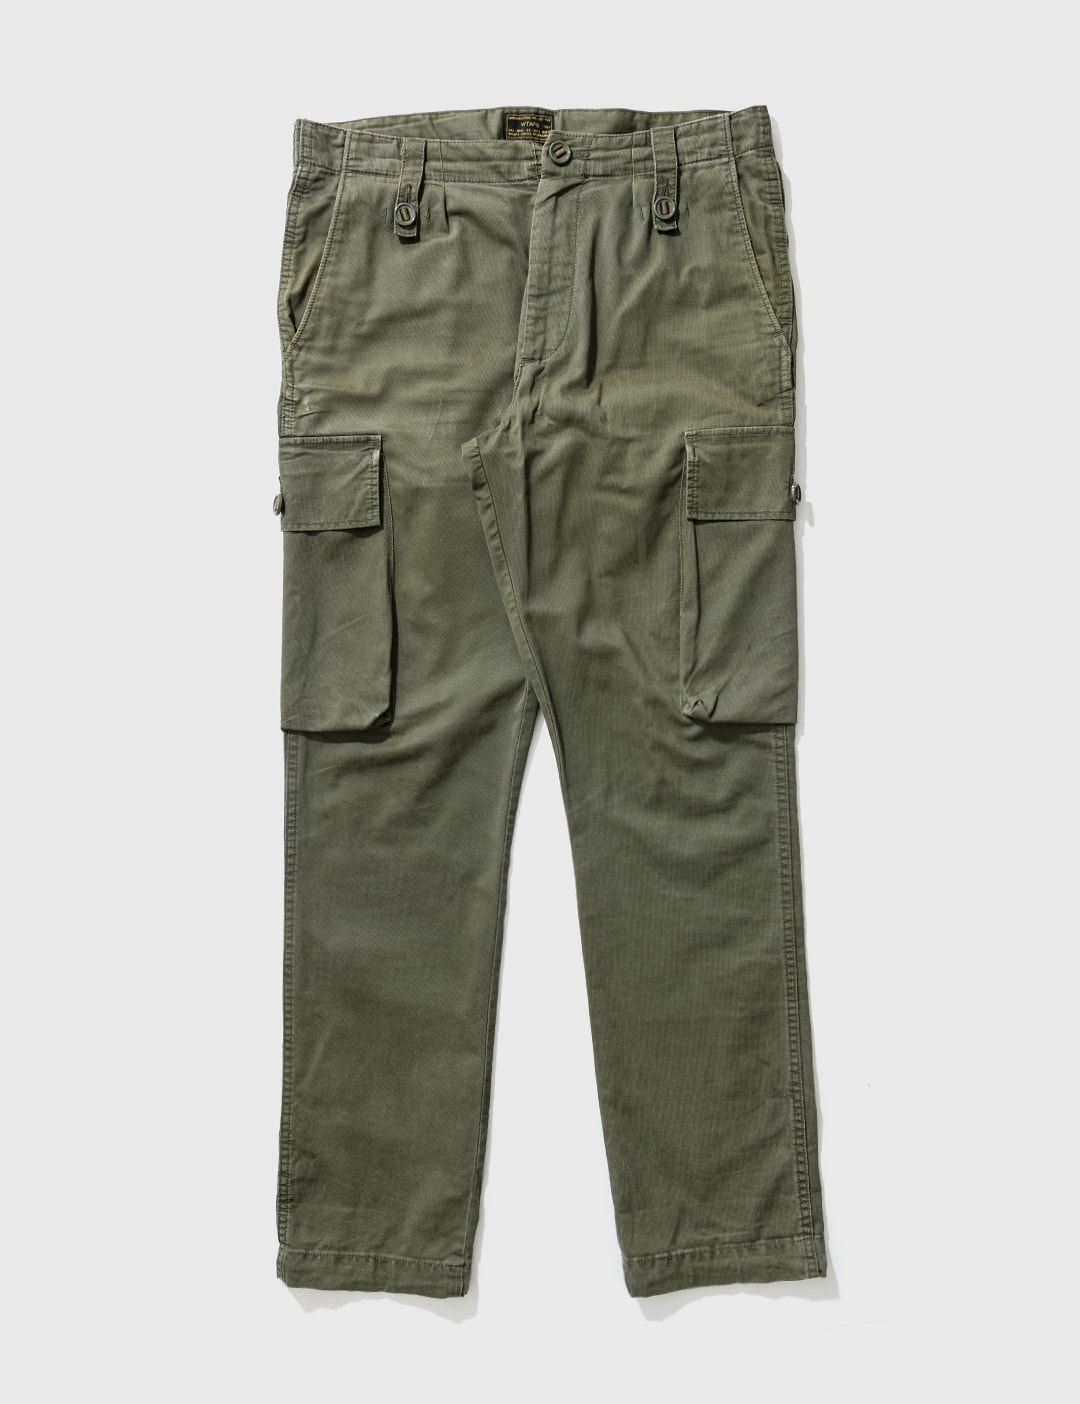 Wtaps Buttoned Belt Loop Cargo Pants Placeholder Image